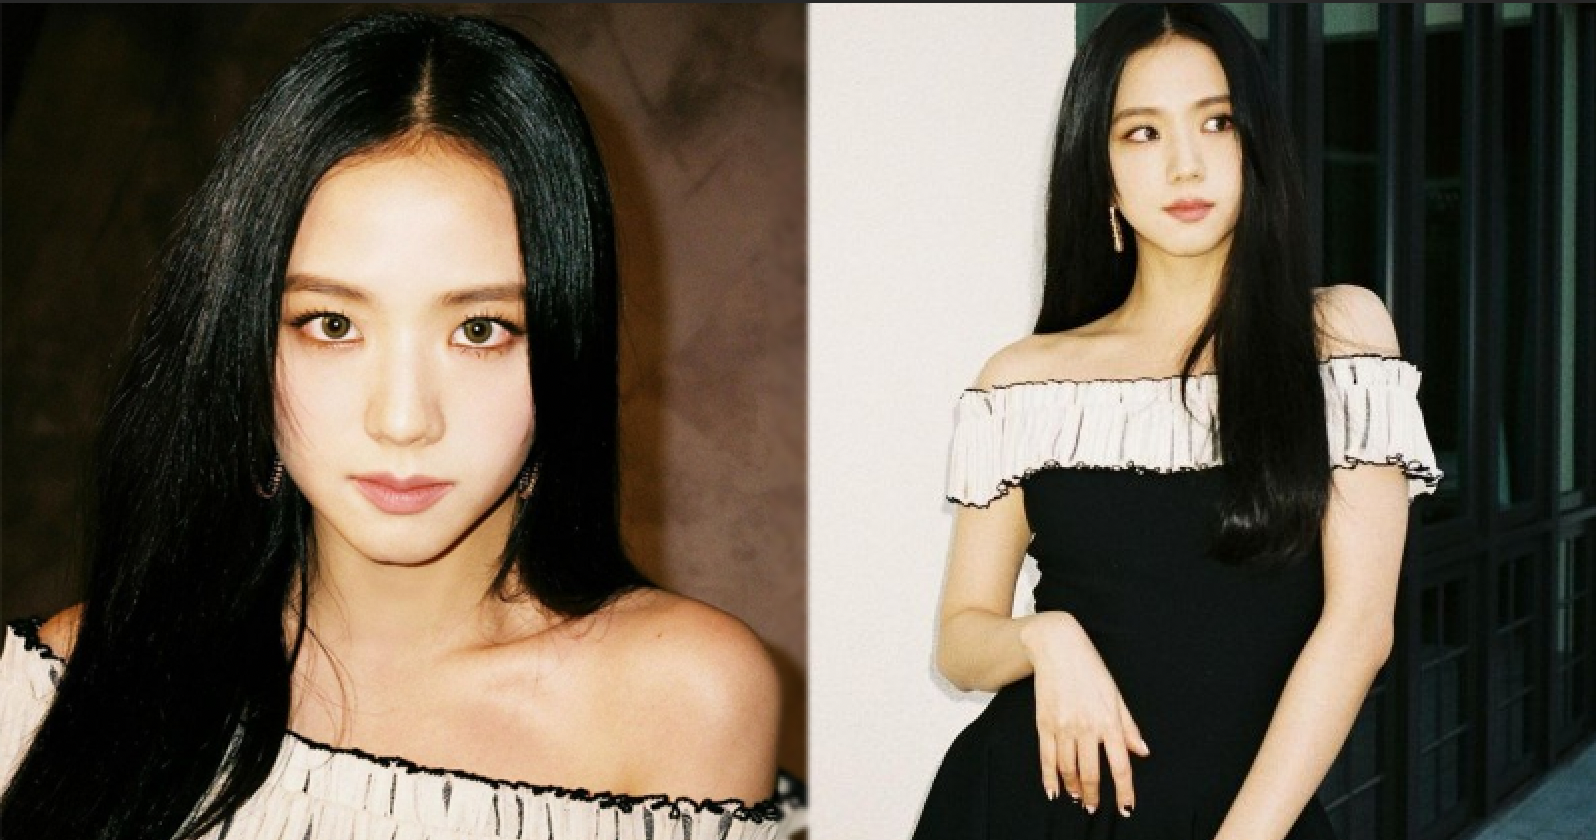 BLACKPINK Jisoo Stuns Everyone With $11,000 Outfit in Recent Instagram Post